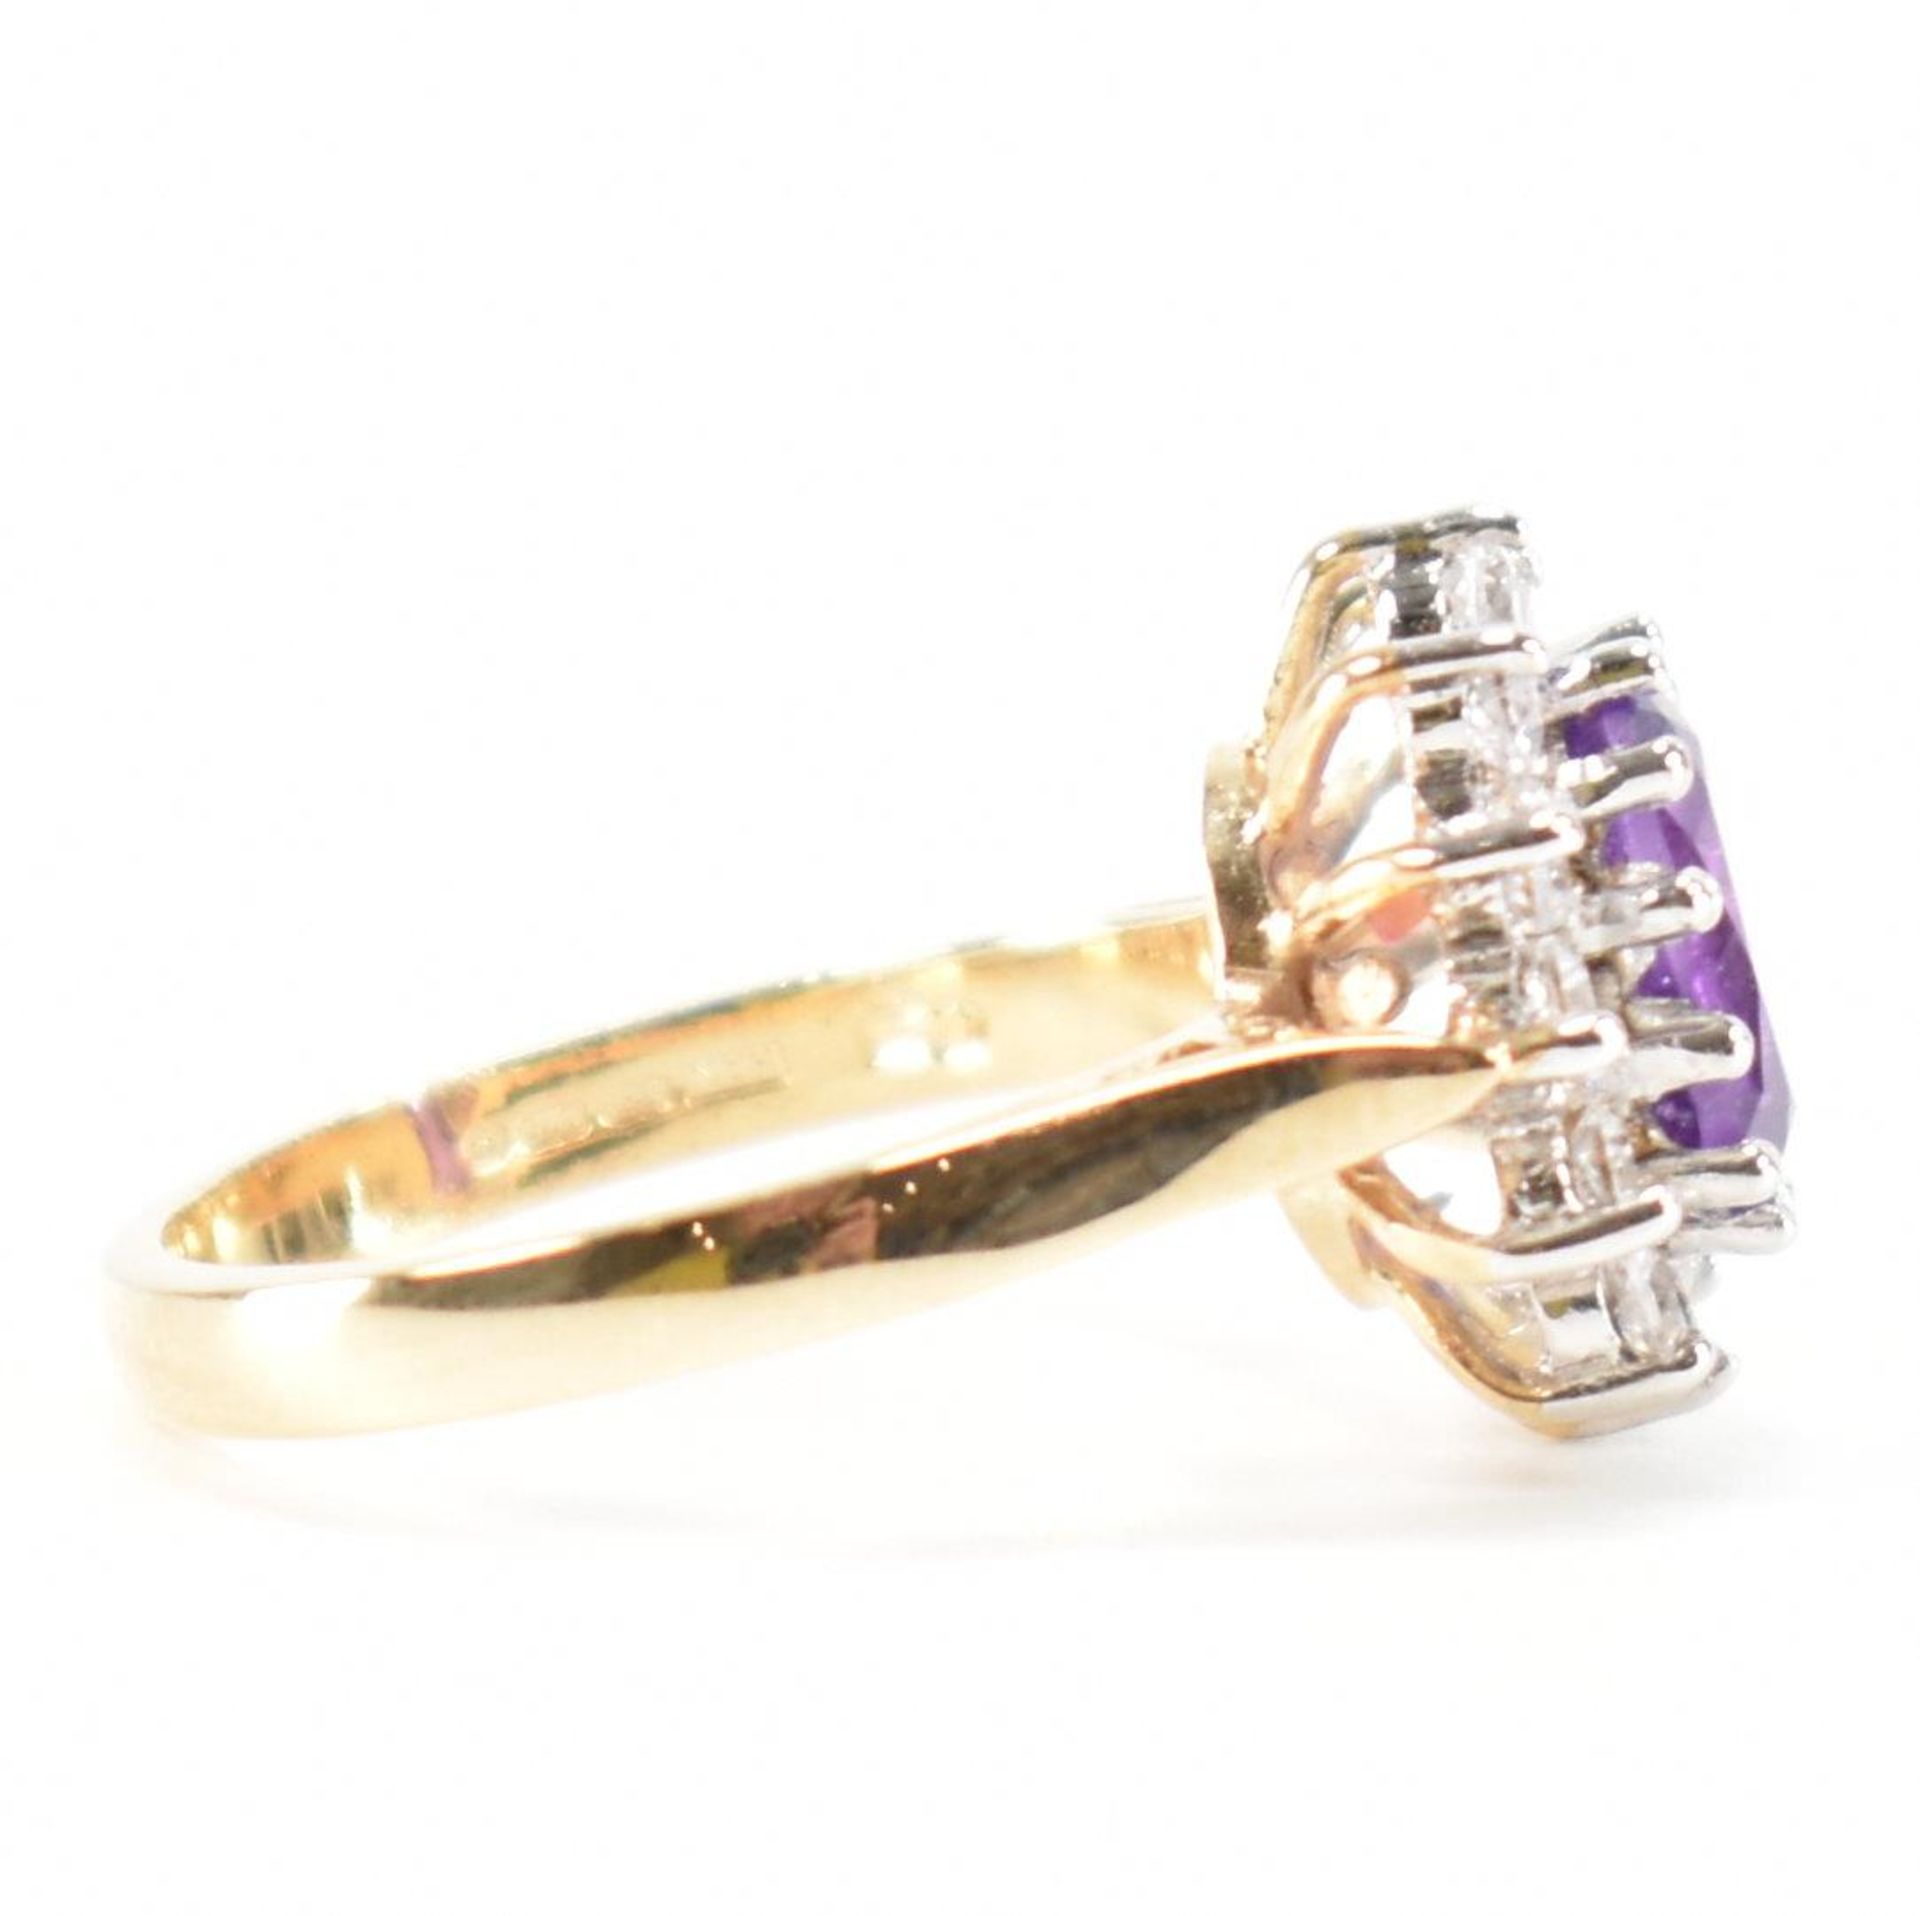 HALLMARKED 9CT GOLD AMETHYST & CZ CLUSTER RING - Image 5 of 8